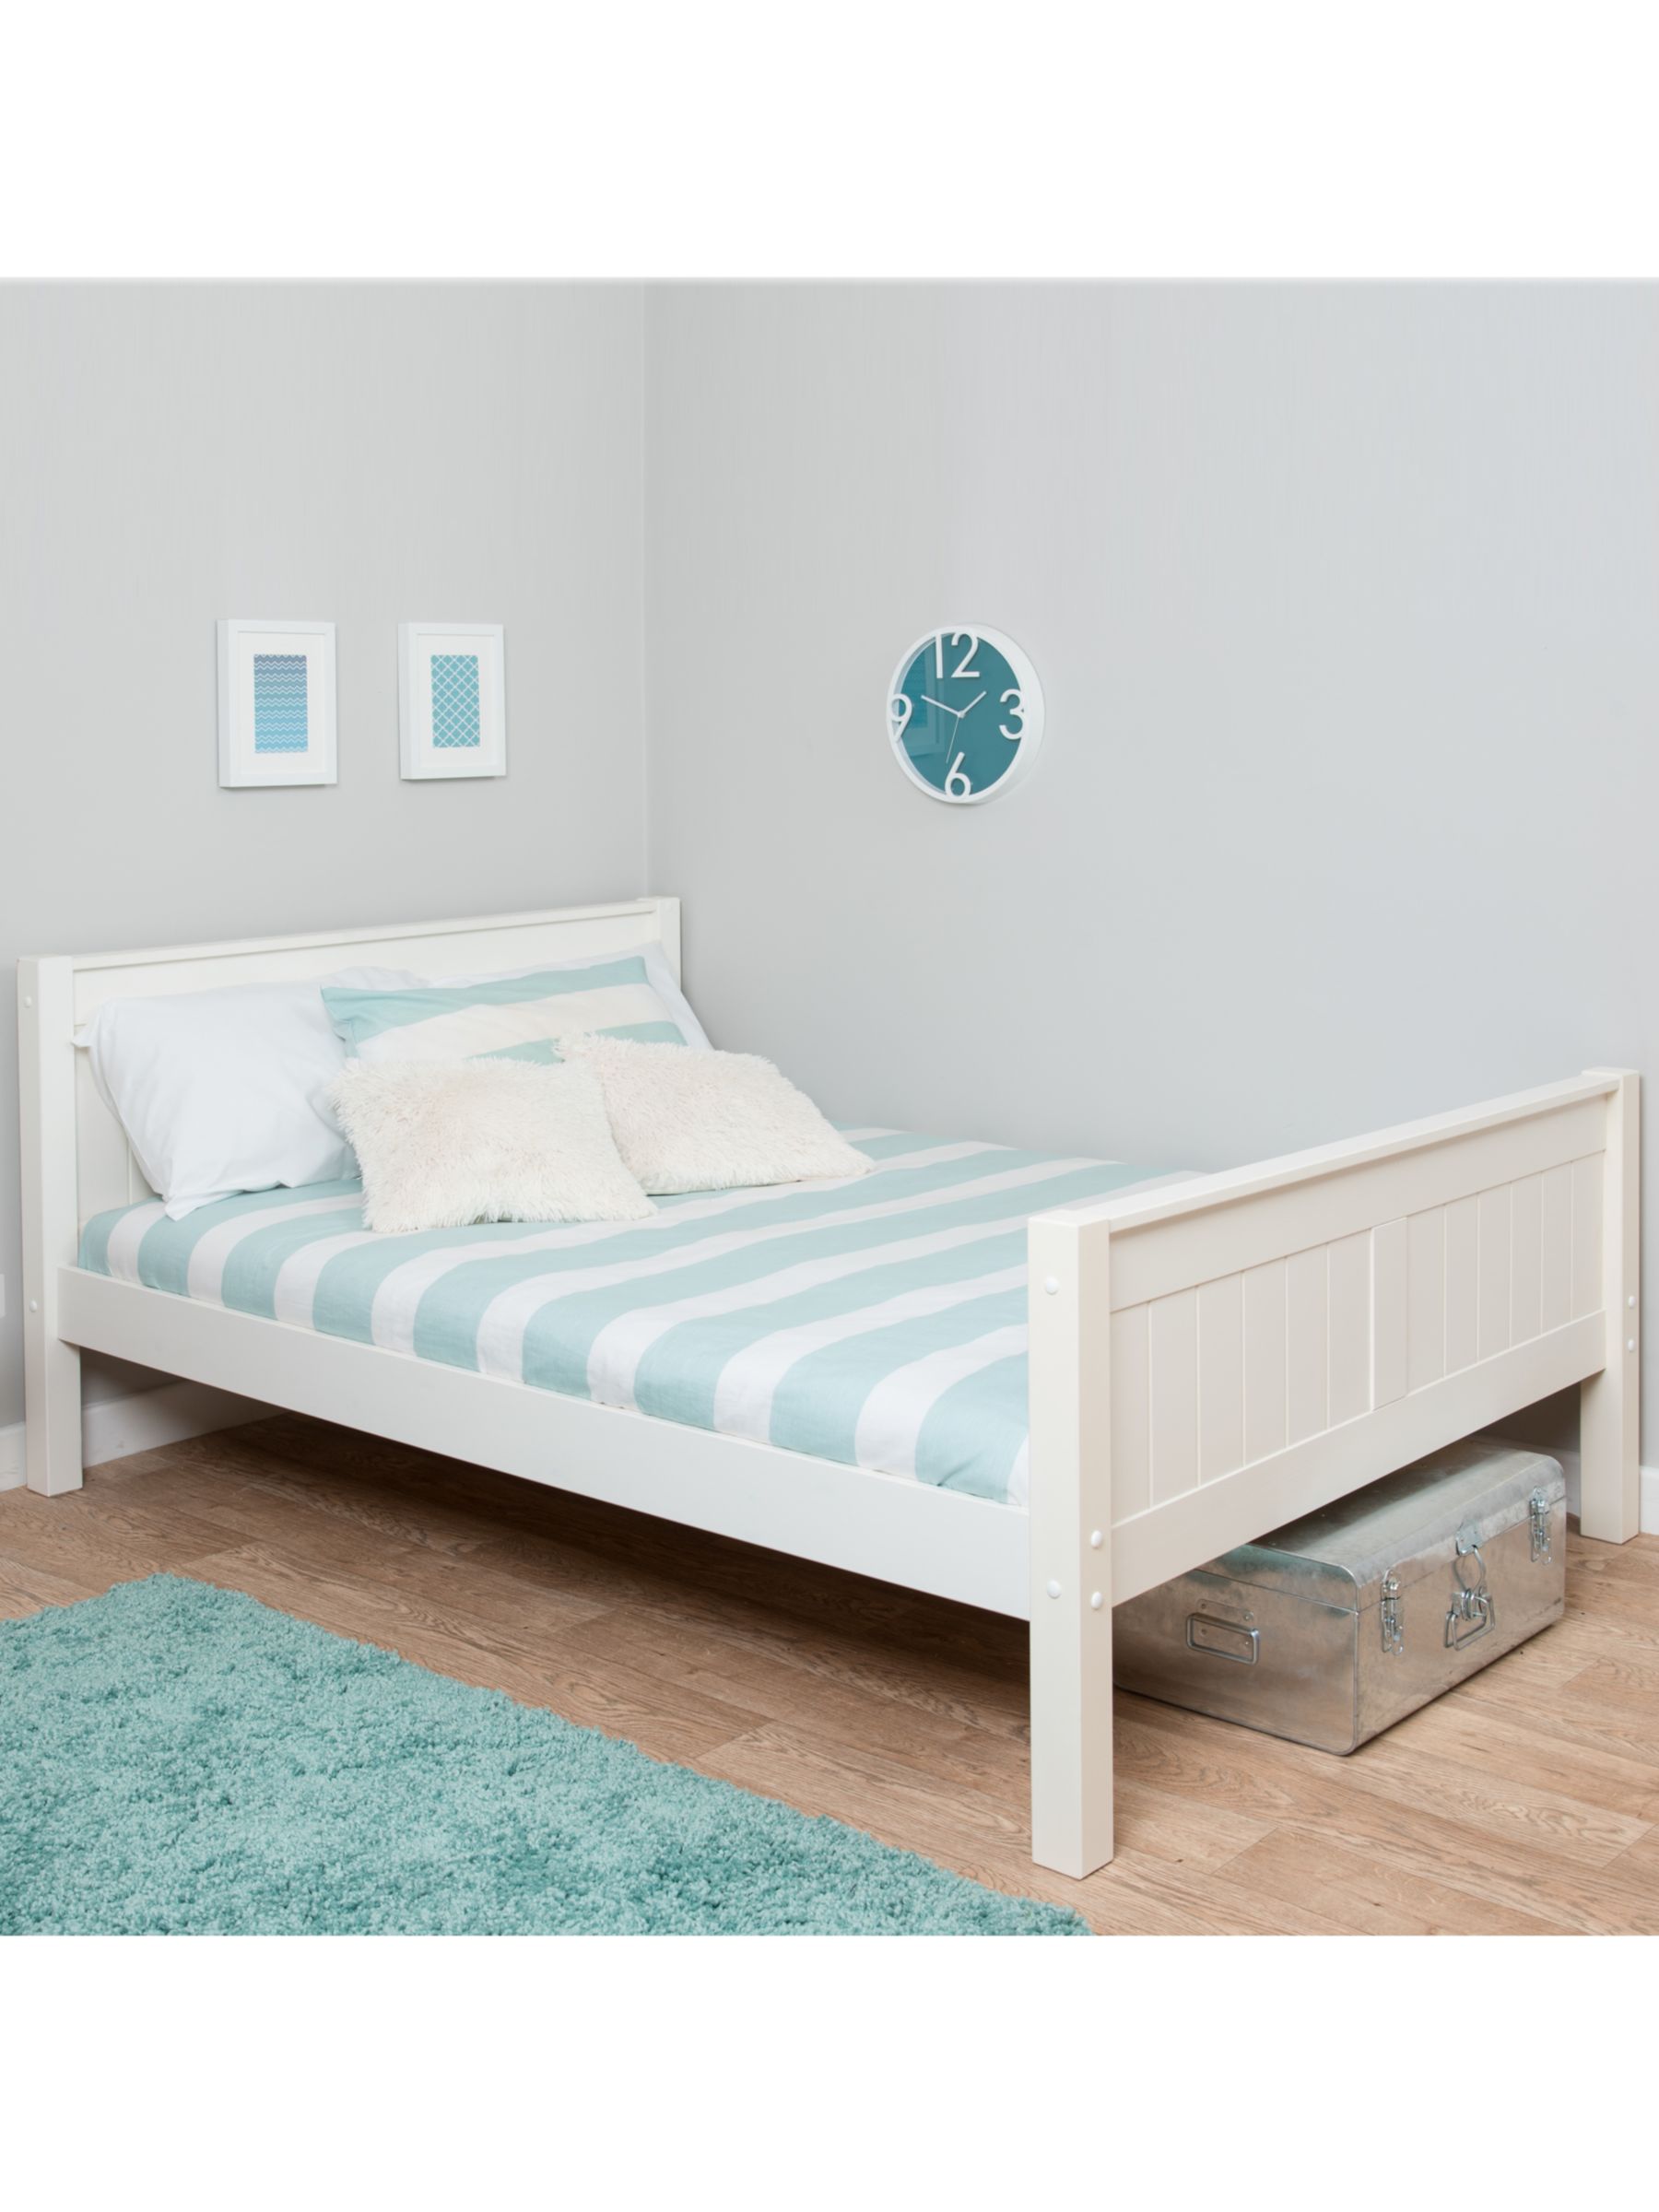 Photo of Stompa classic childrens bed frame with drawers small double white